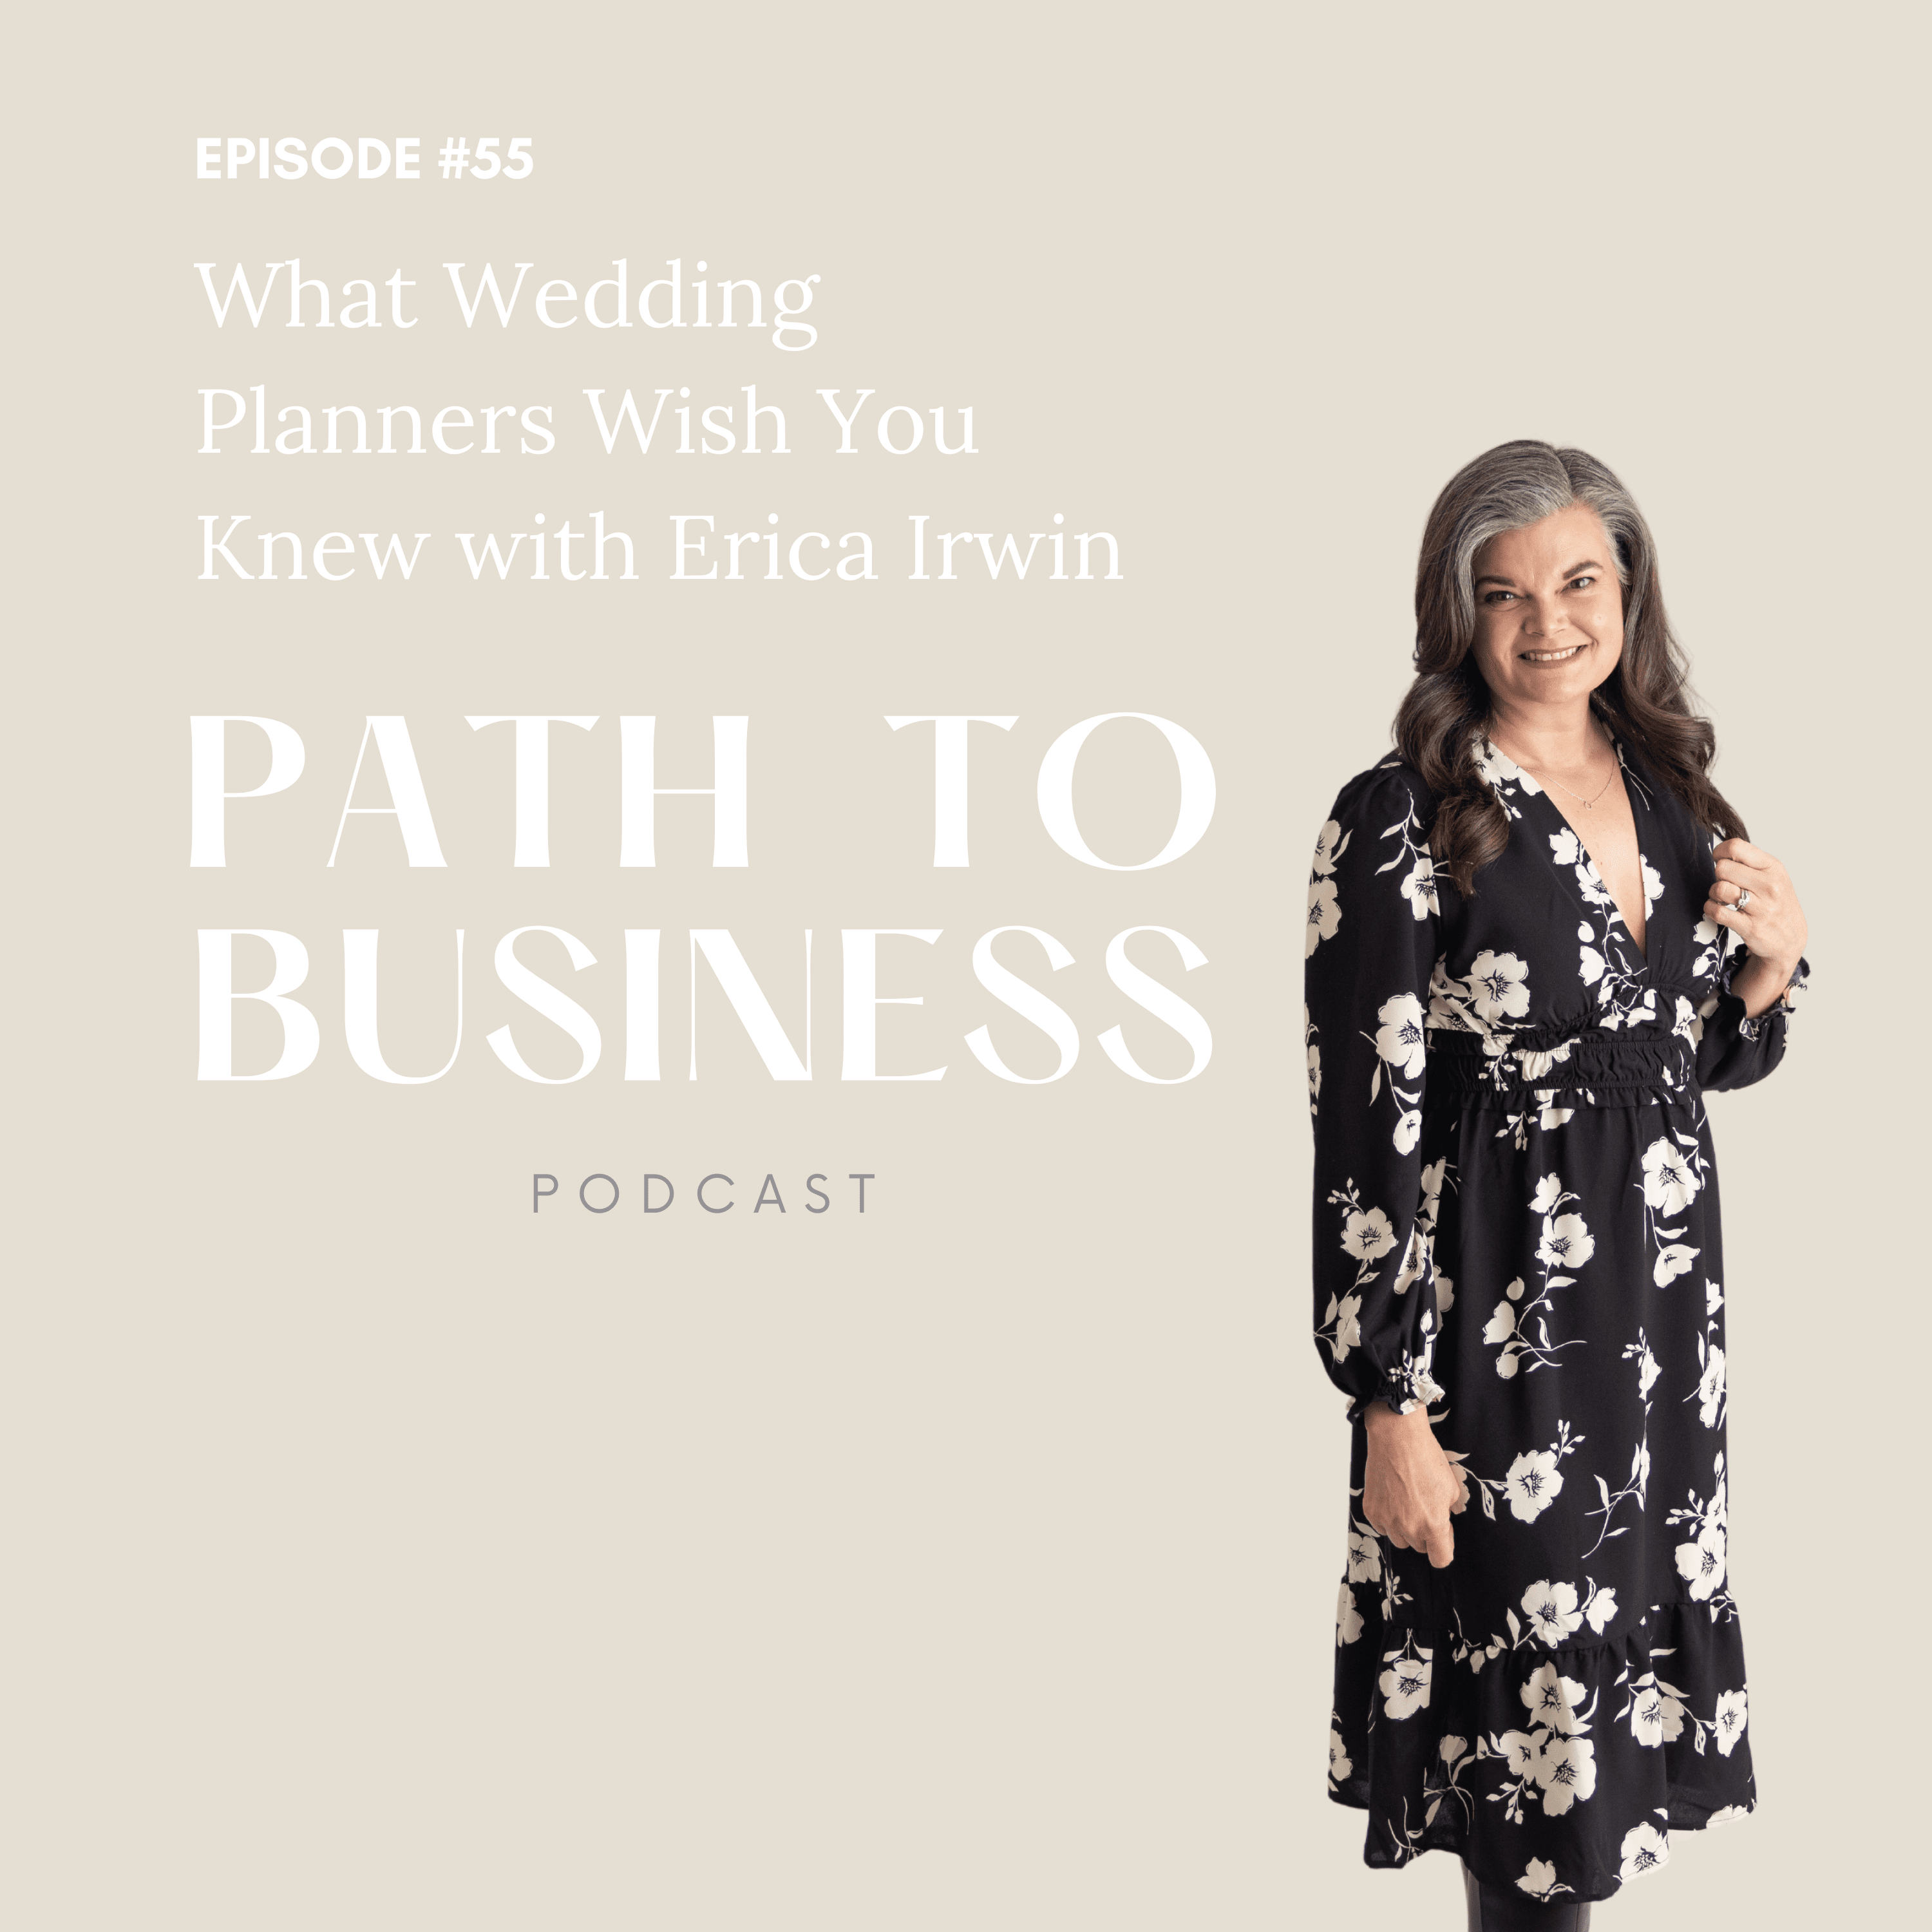 erica irwin path to business podcast - what wedding planners wish you knew